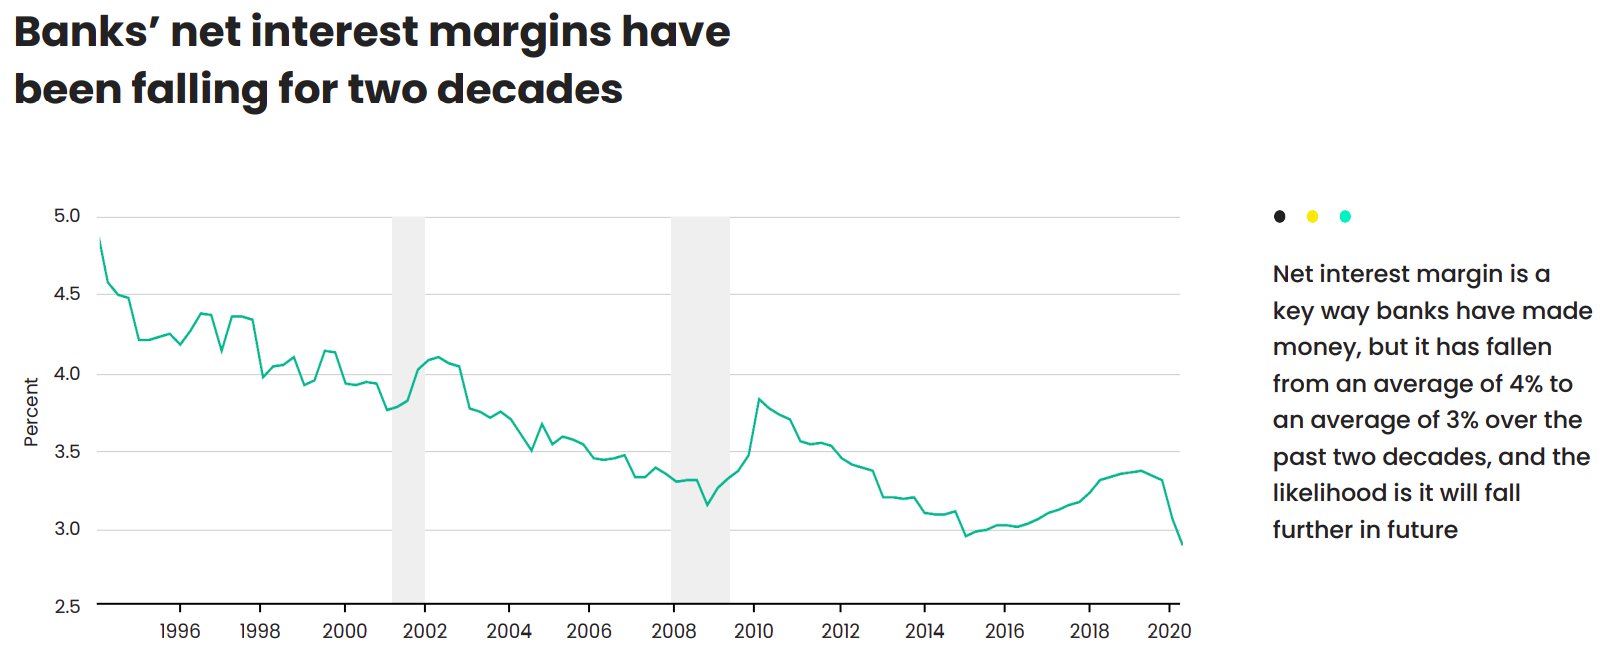 net interest margins have been falling for two decades